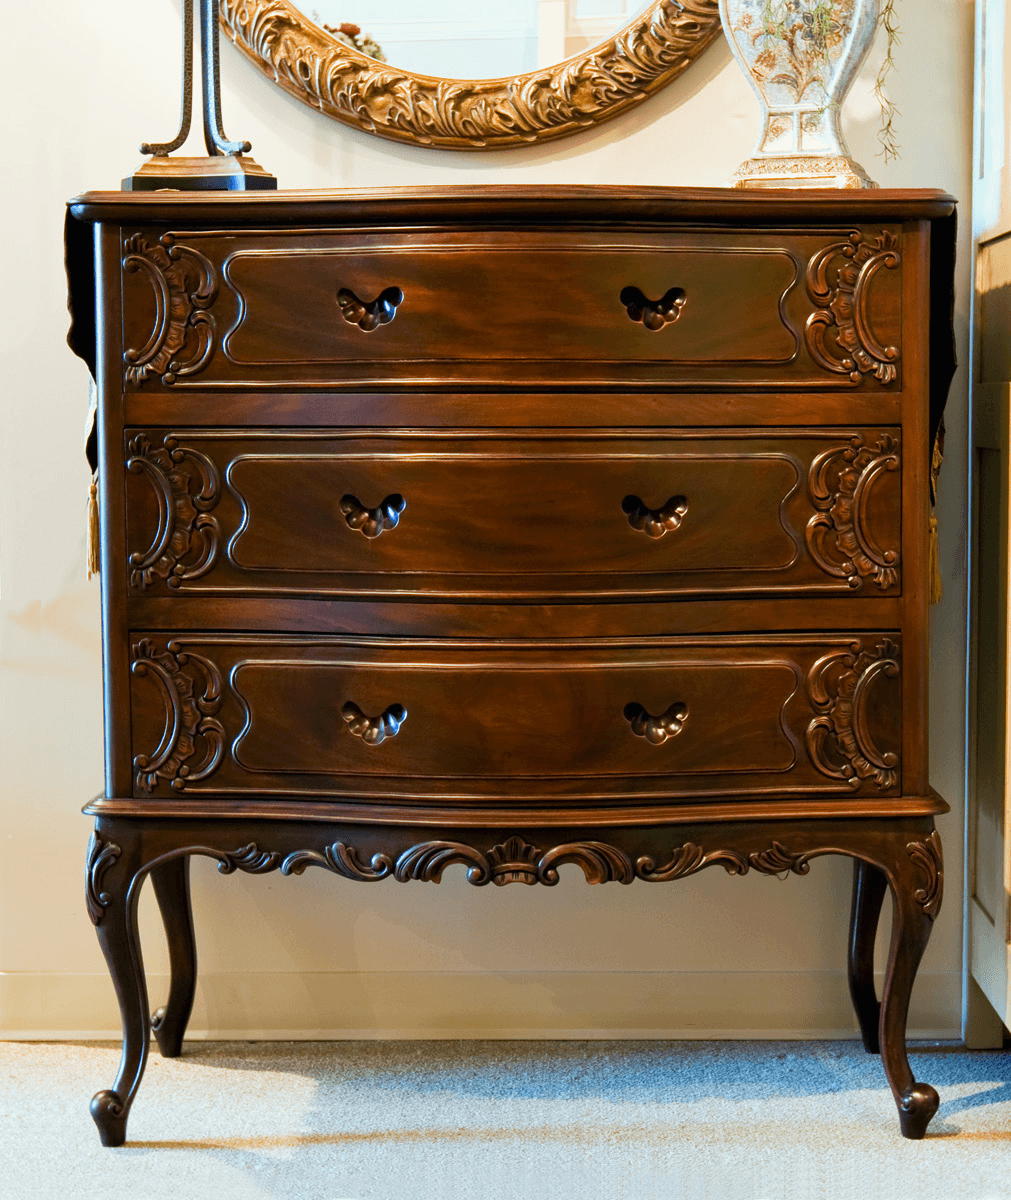 THREE DRAWER SERPENTINE HIGH CHEST - House of Chippendale